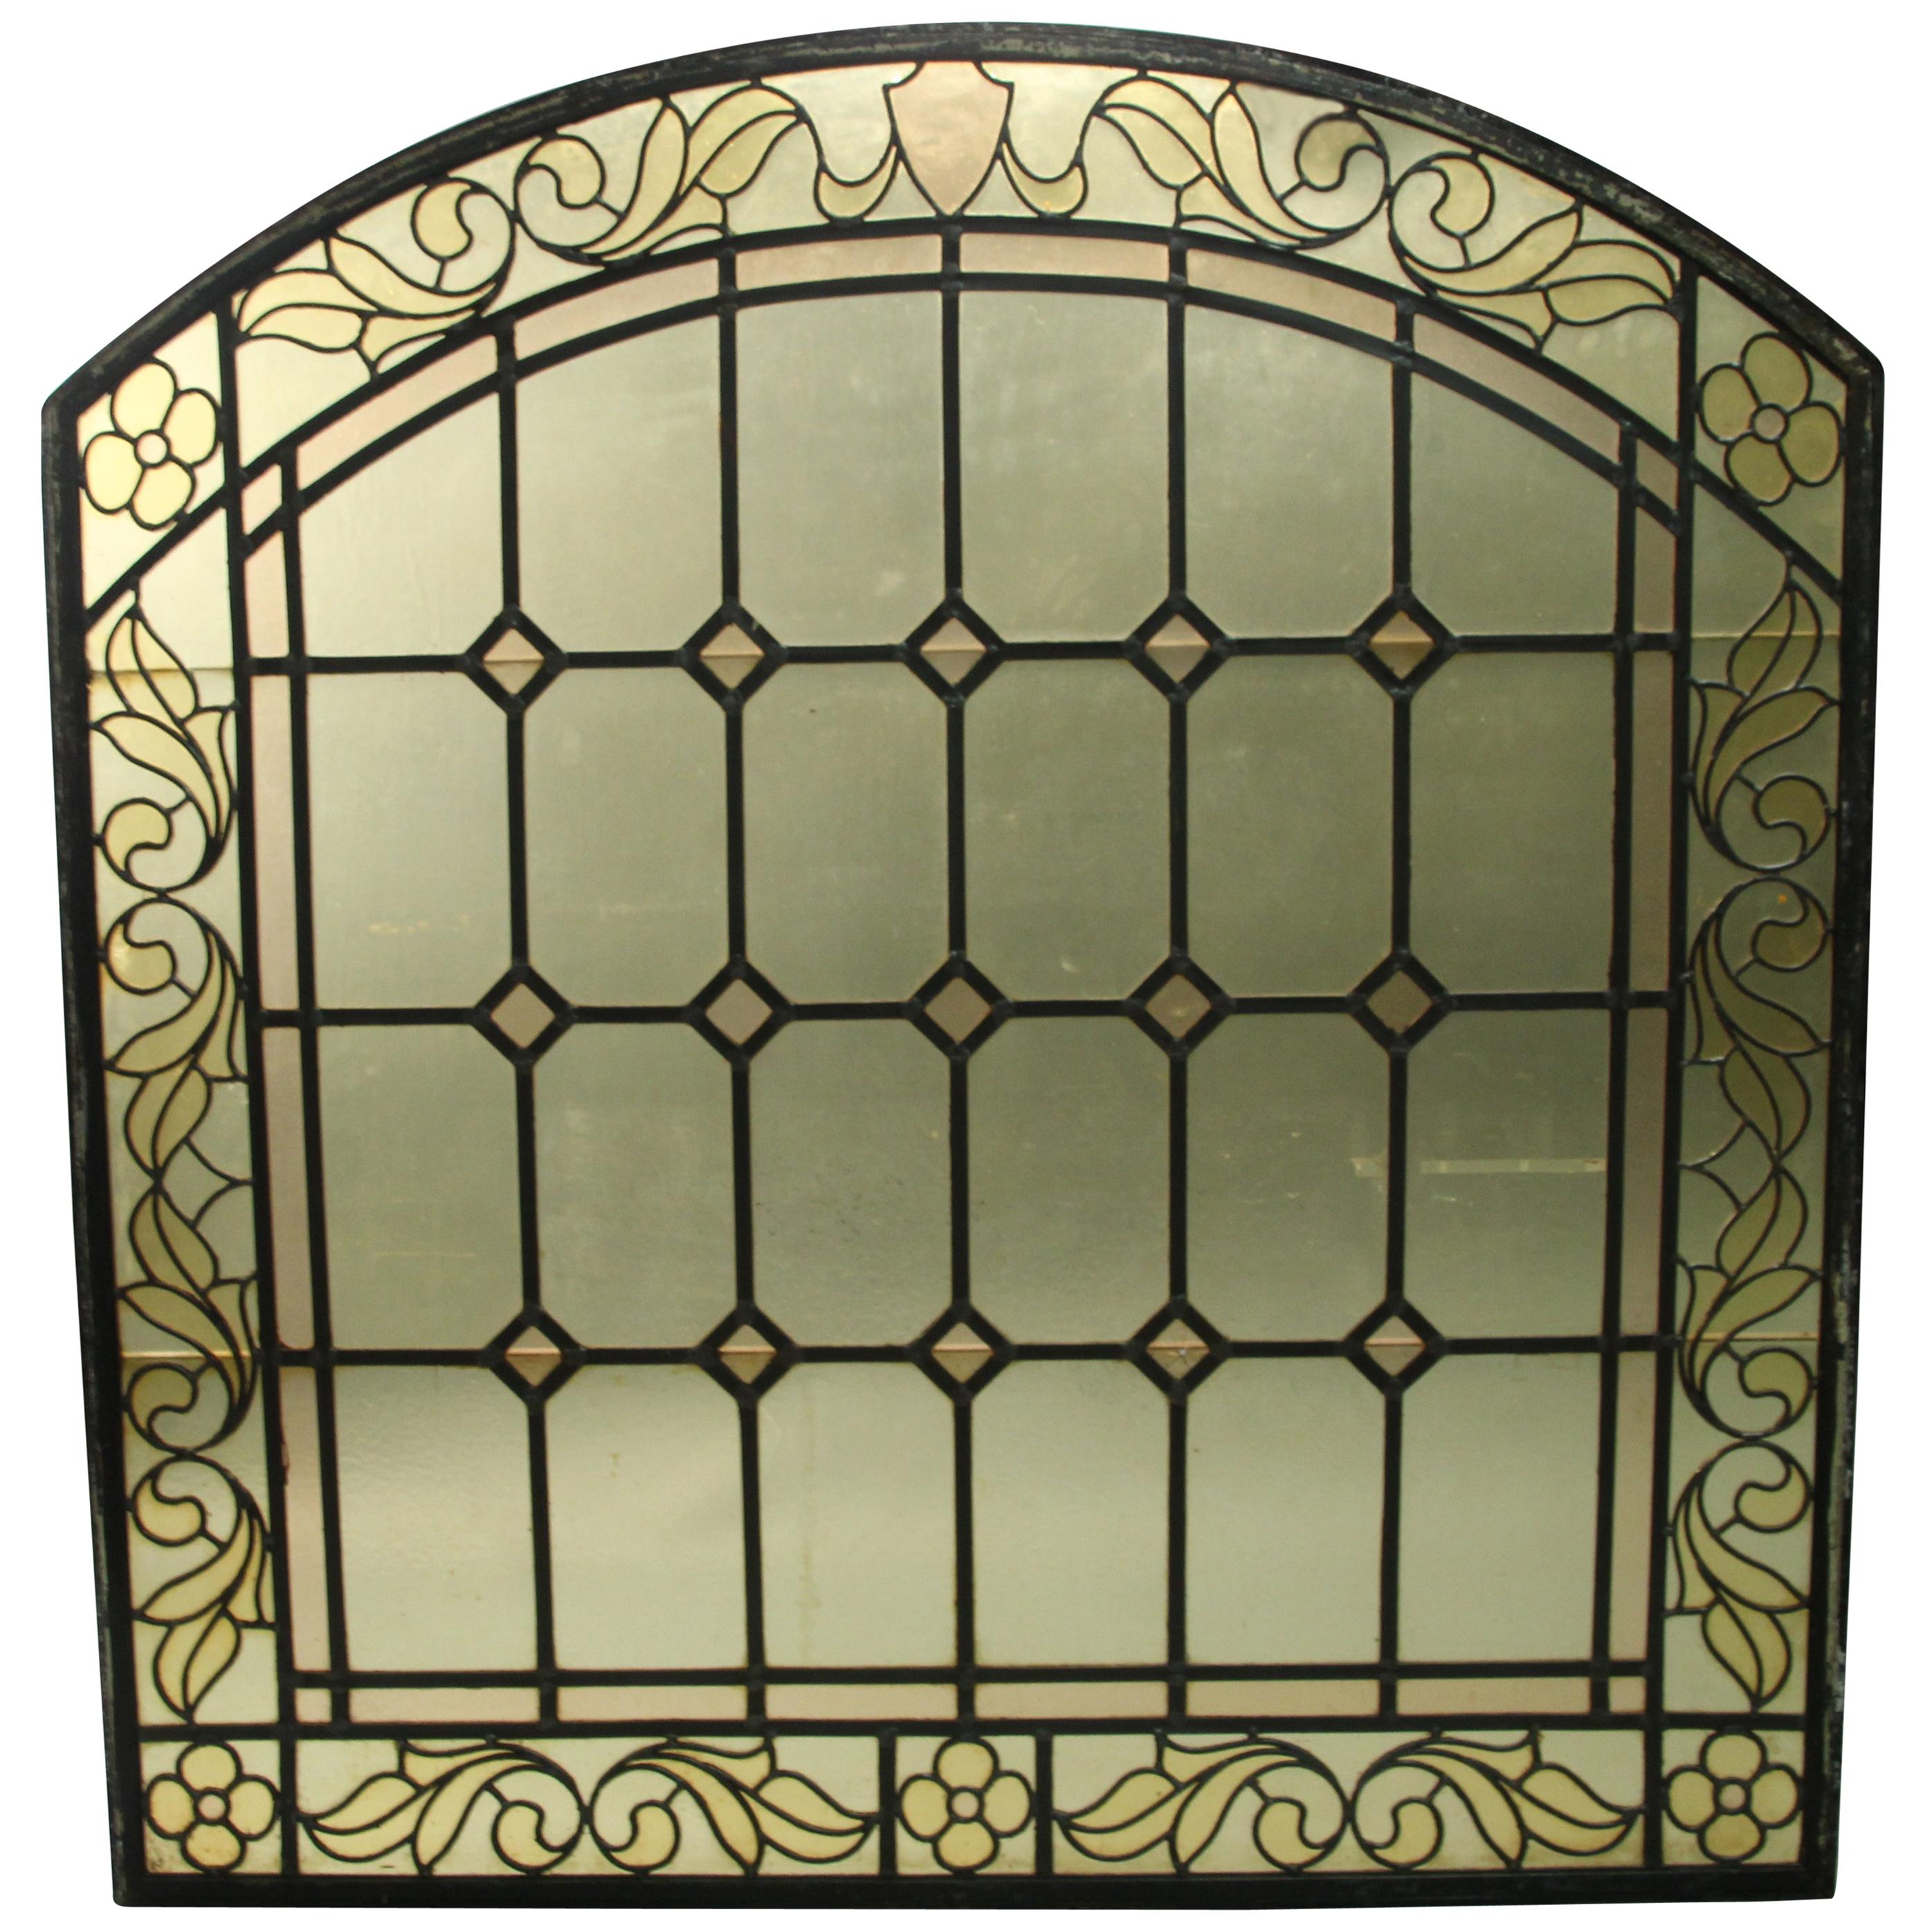 1 of 2 Arched Stained Glass Window For Sale